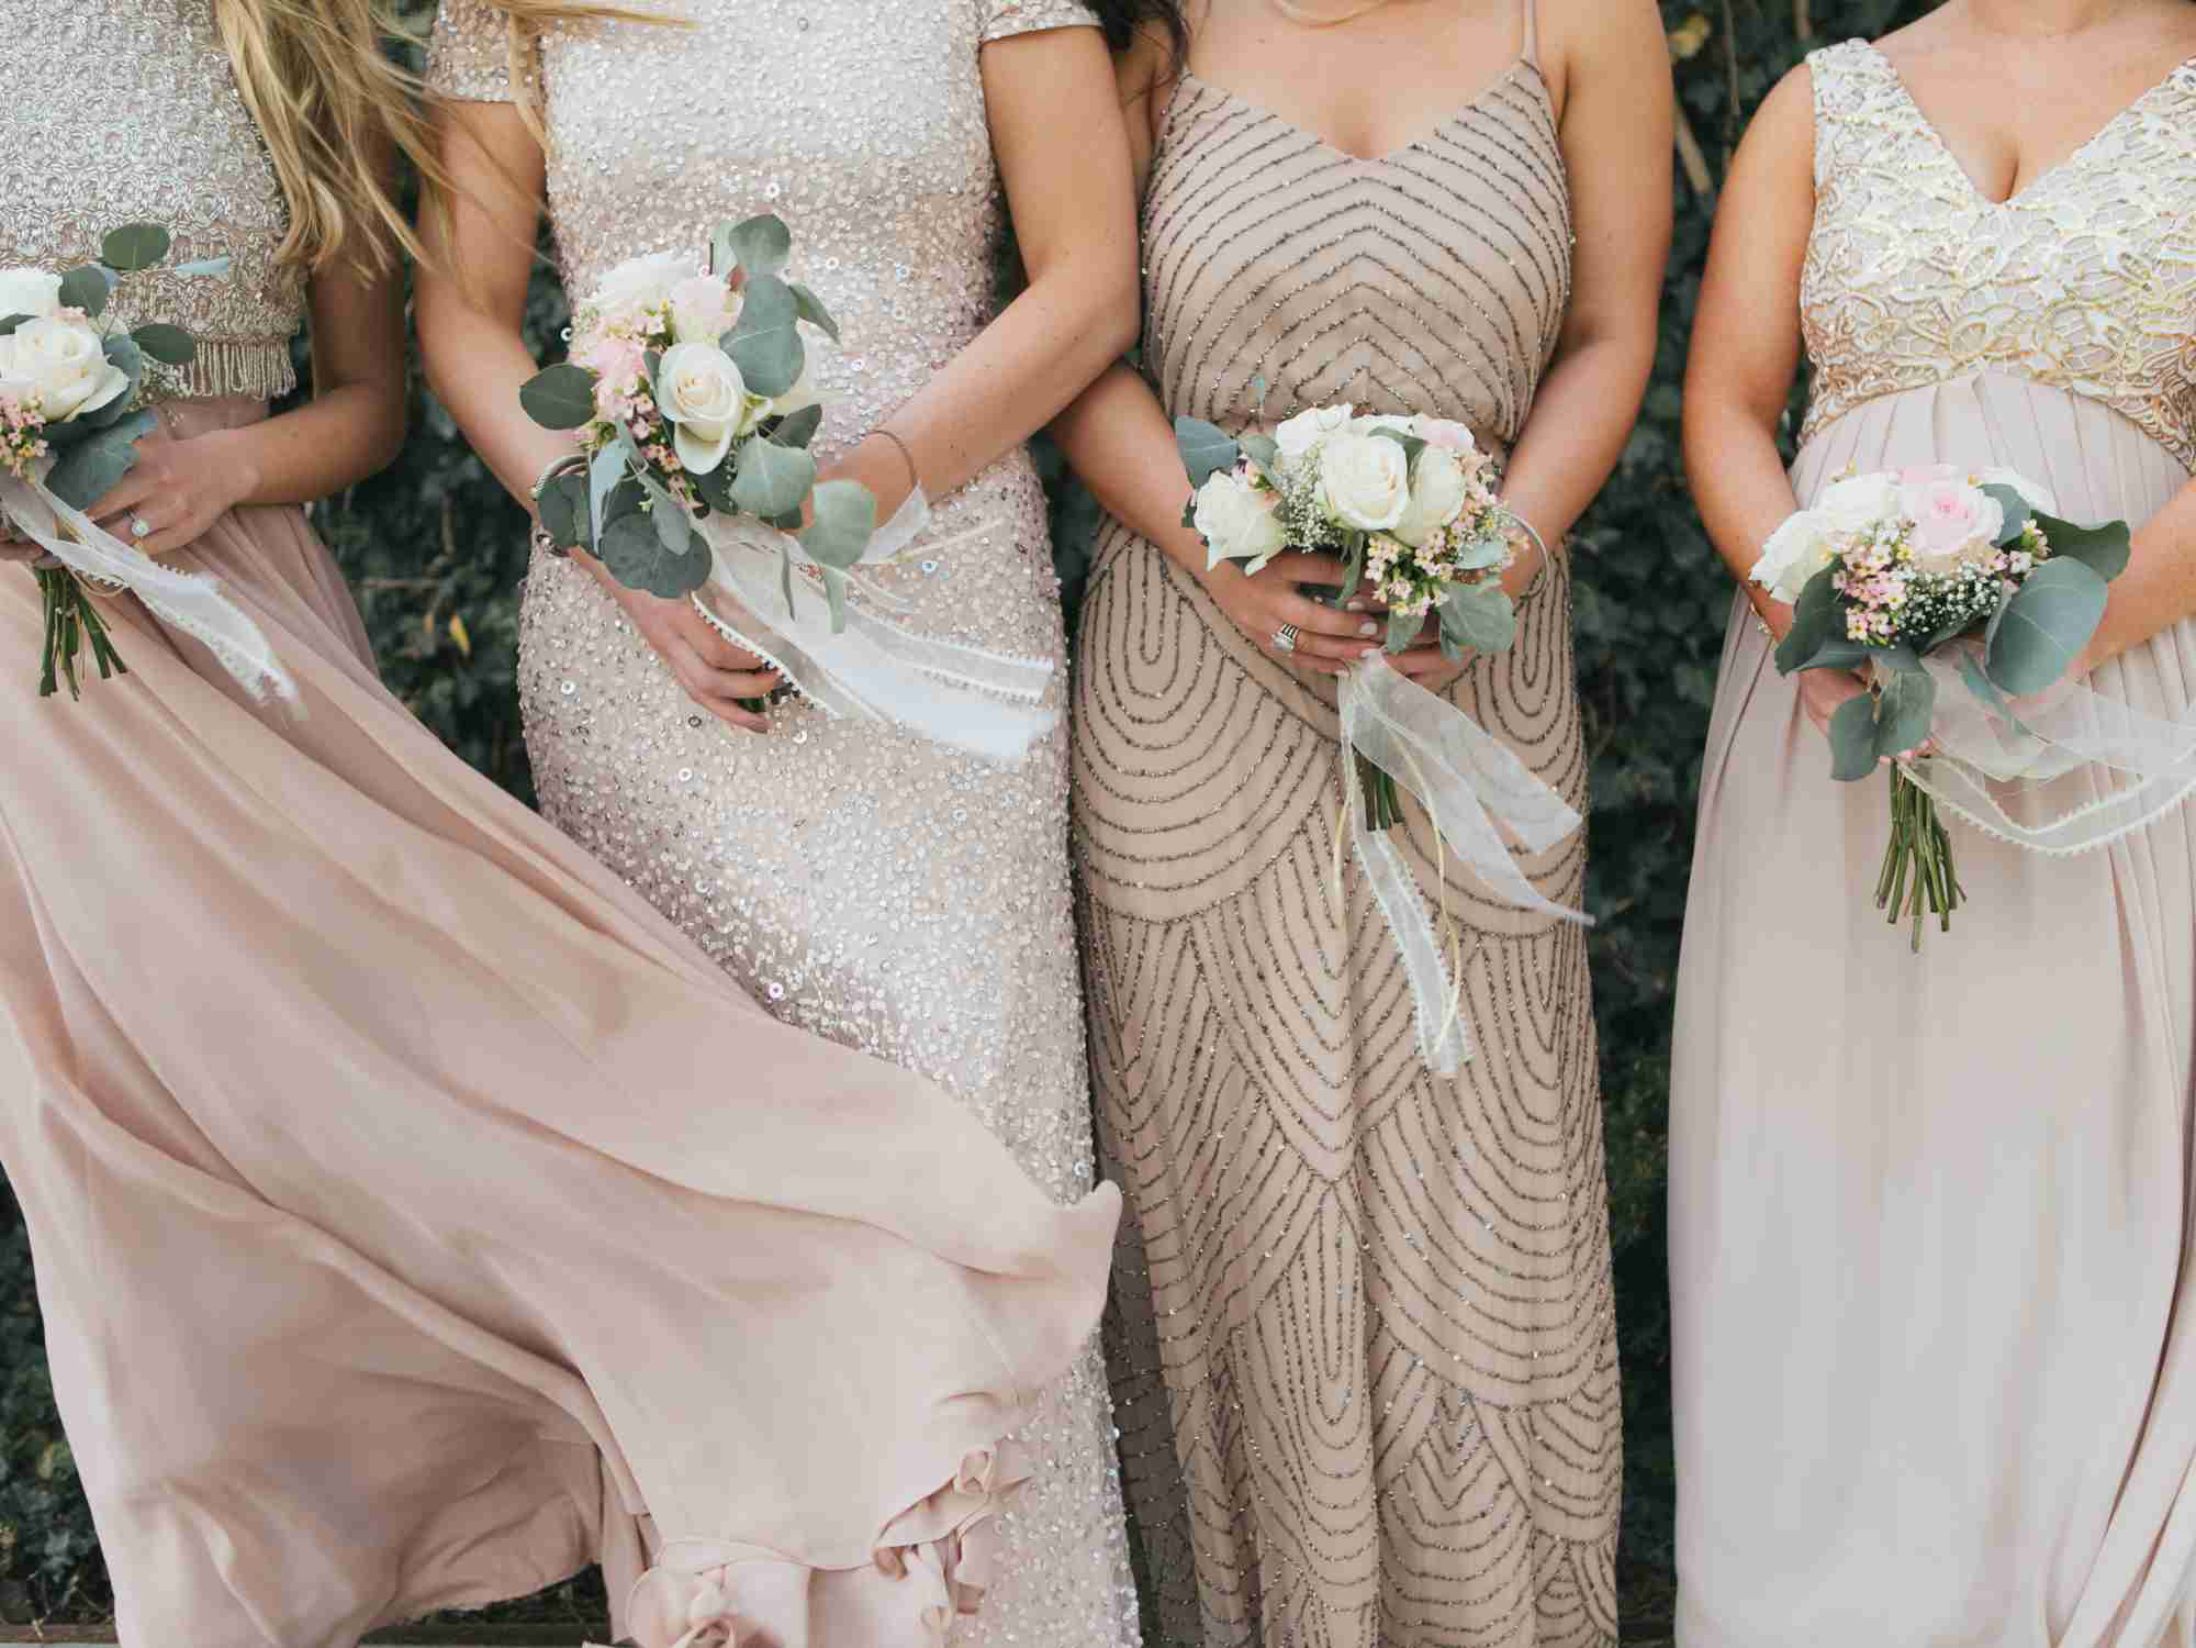 What is a Bridesmaid?